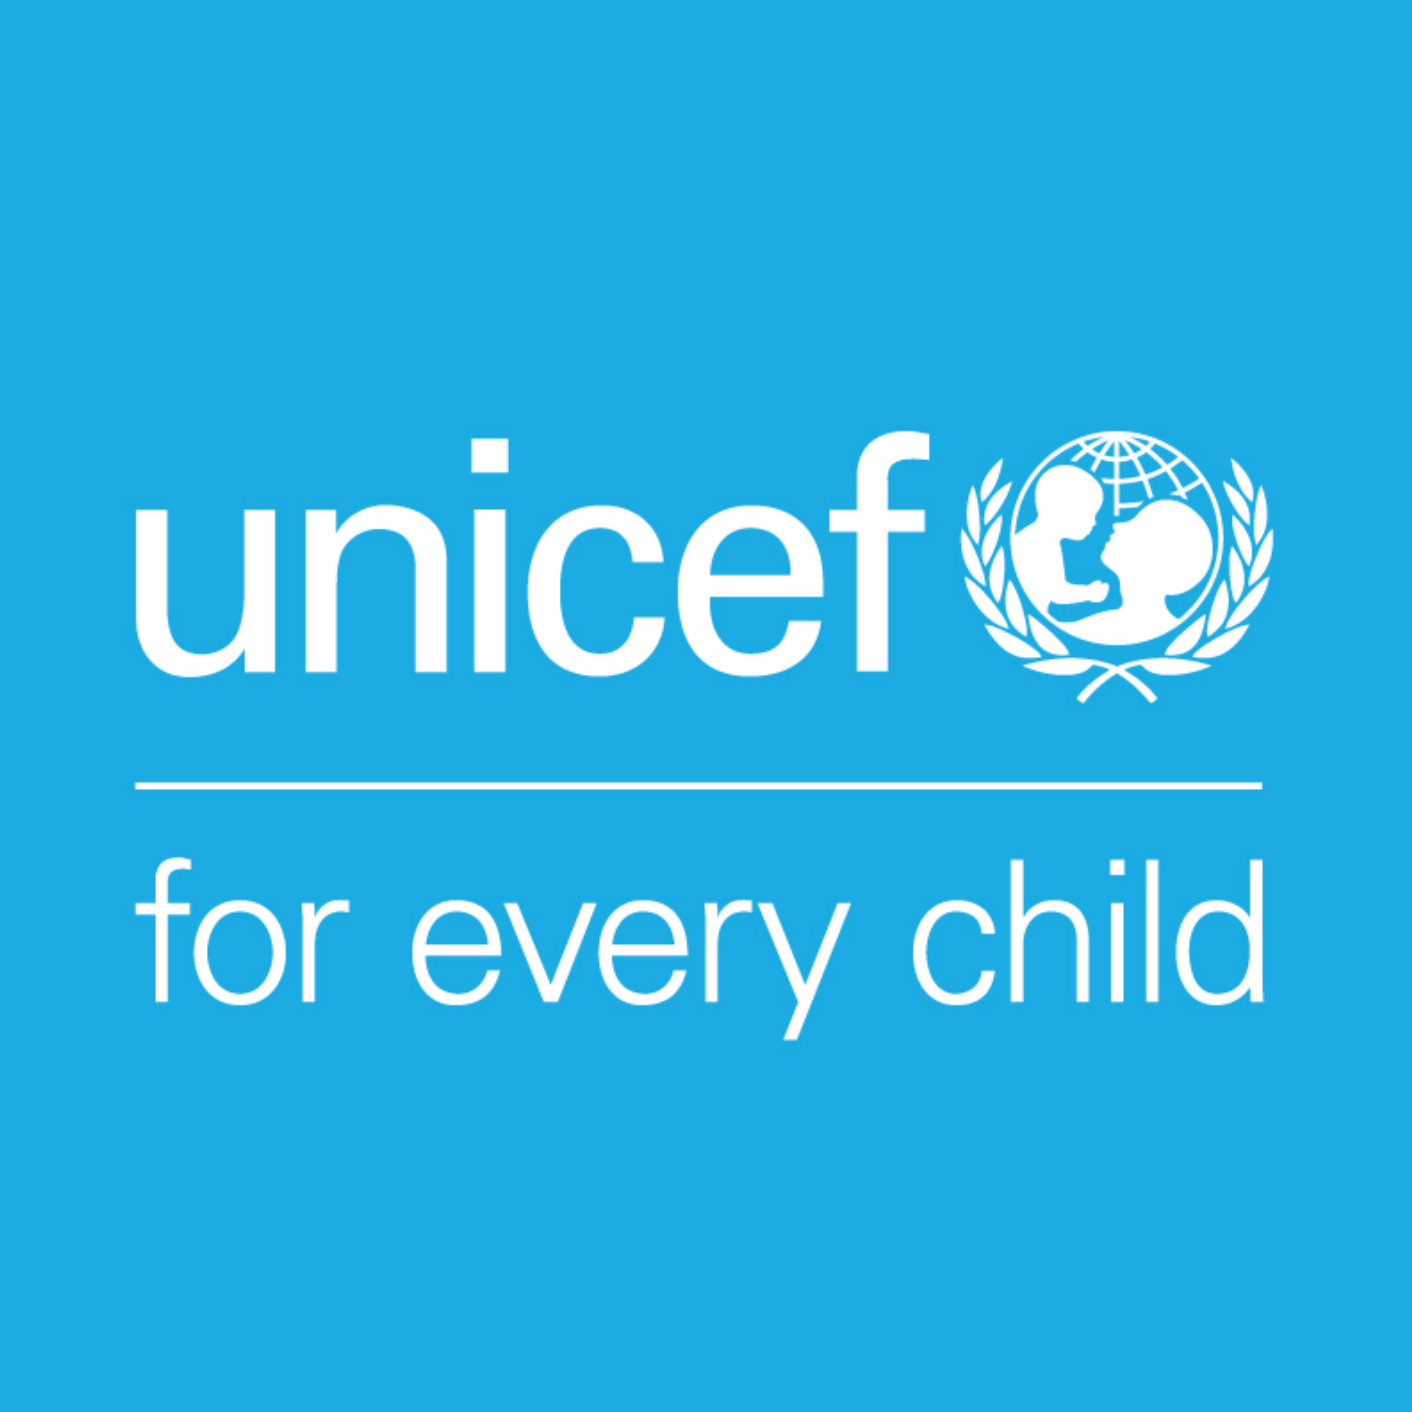  Social Policy and Child Rights Monitoring (UNICEF) 